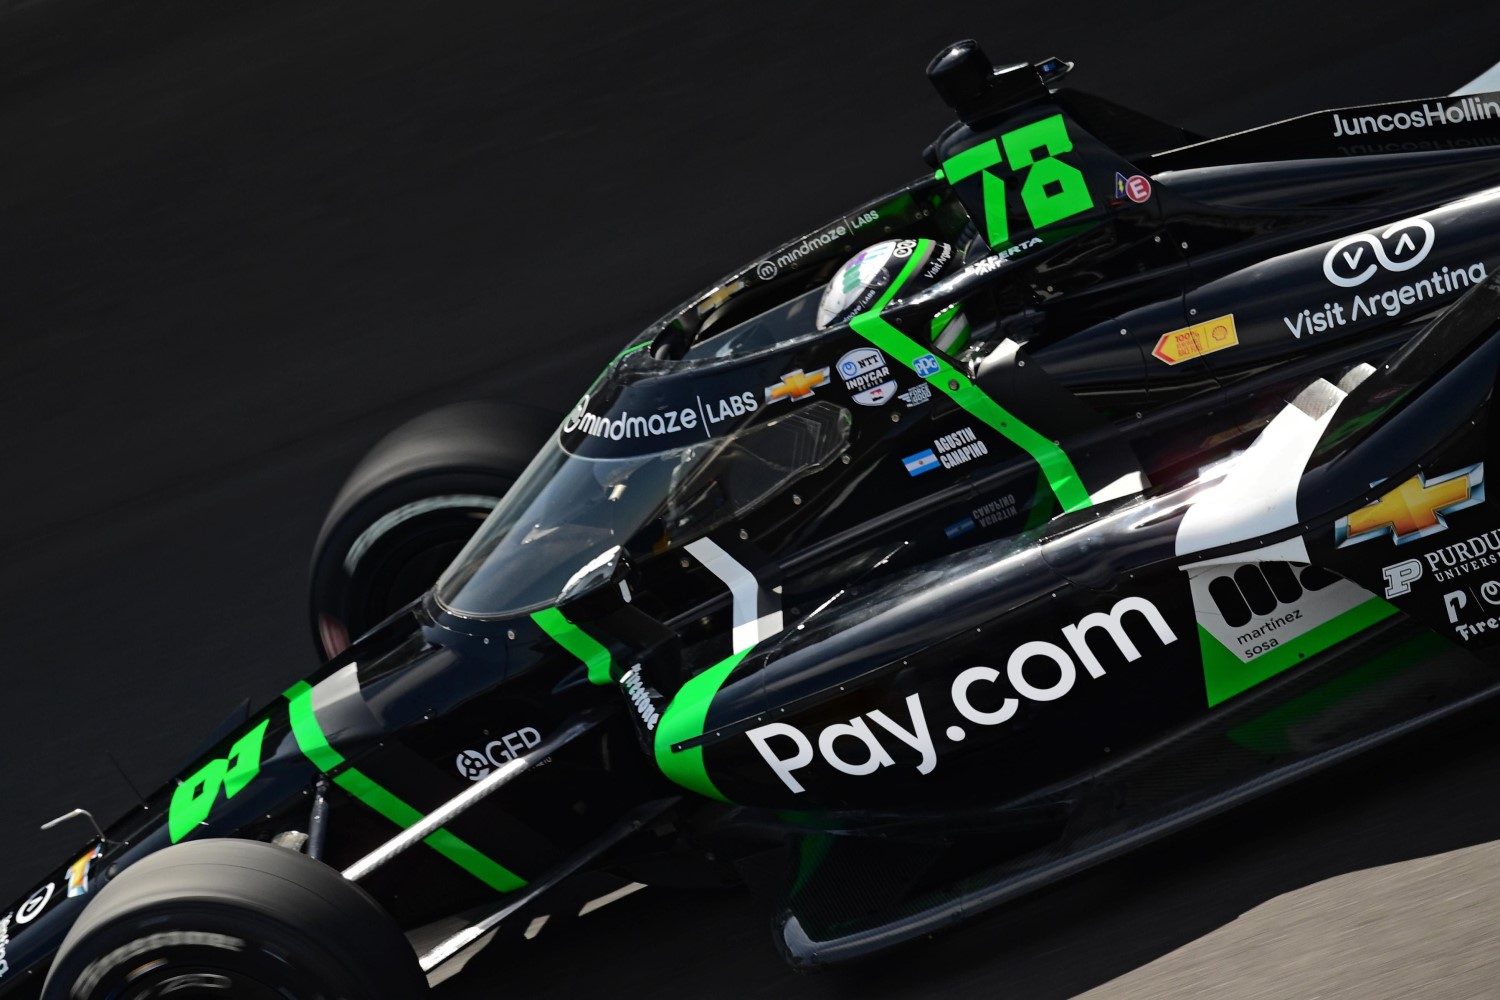 uncos Hollinger Racing announce major multi-year sponsorship deal with Pay.com